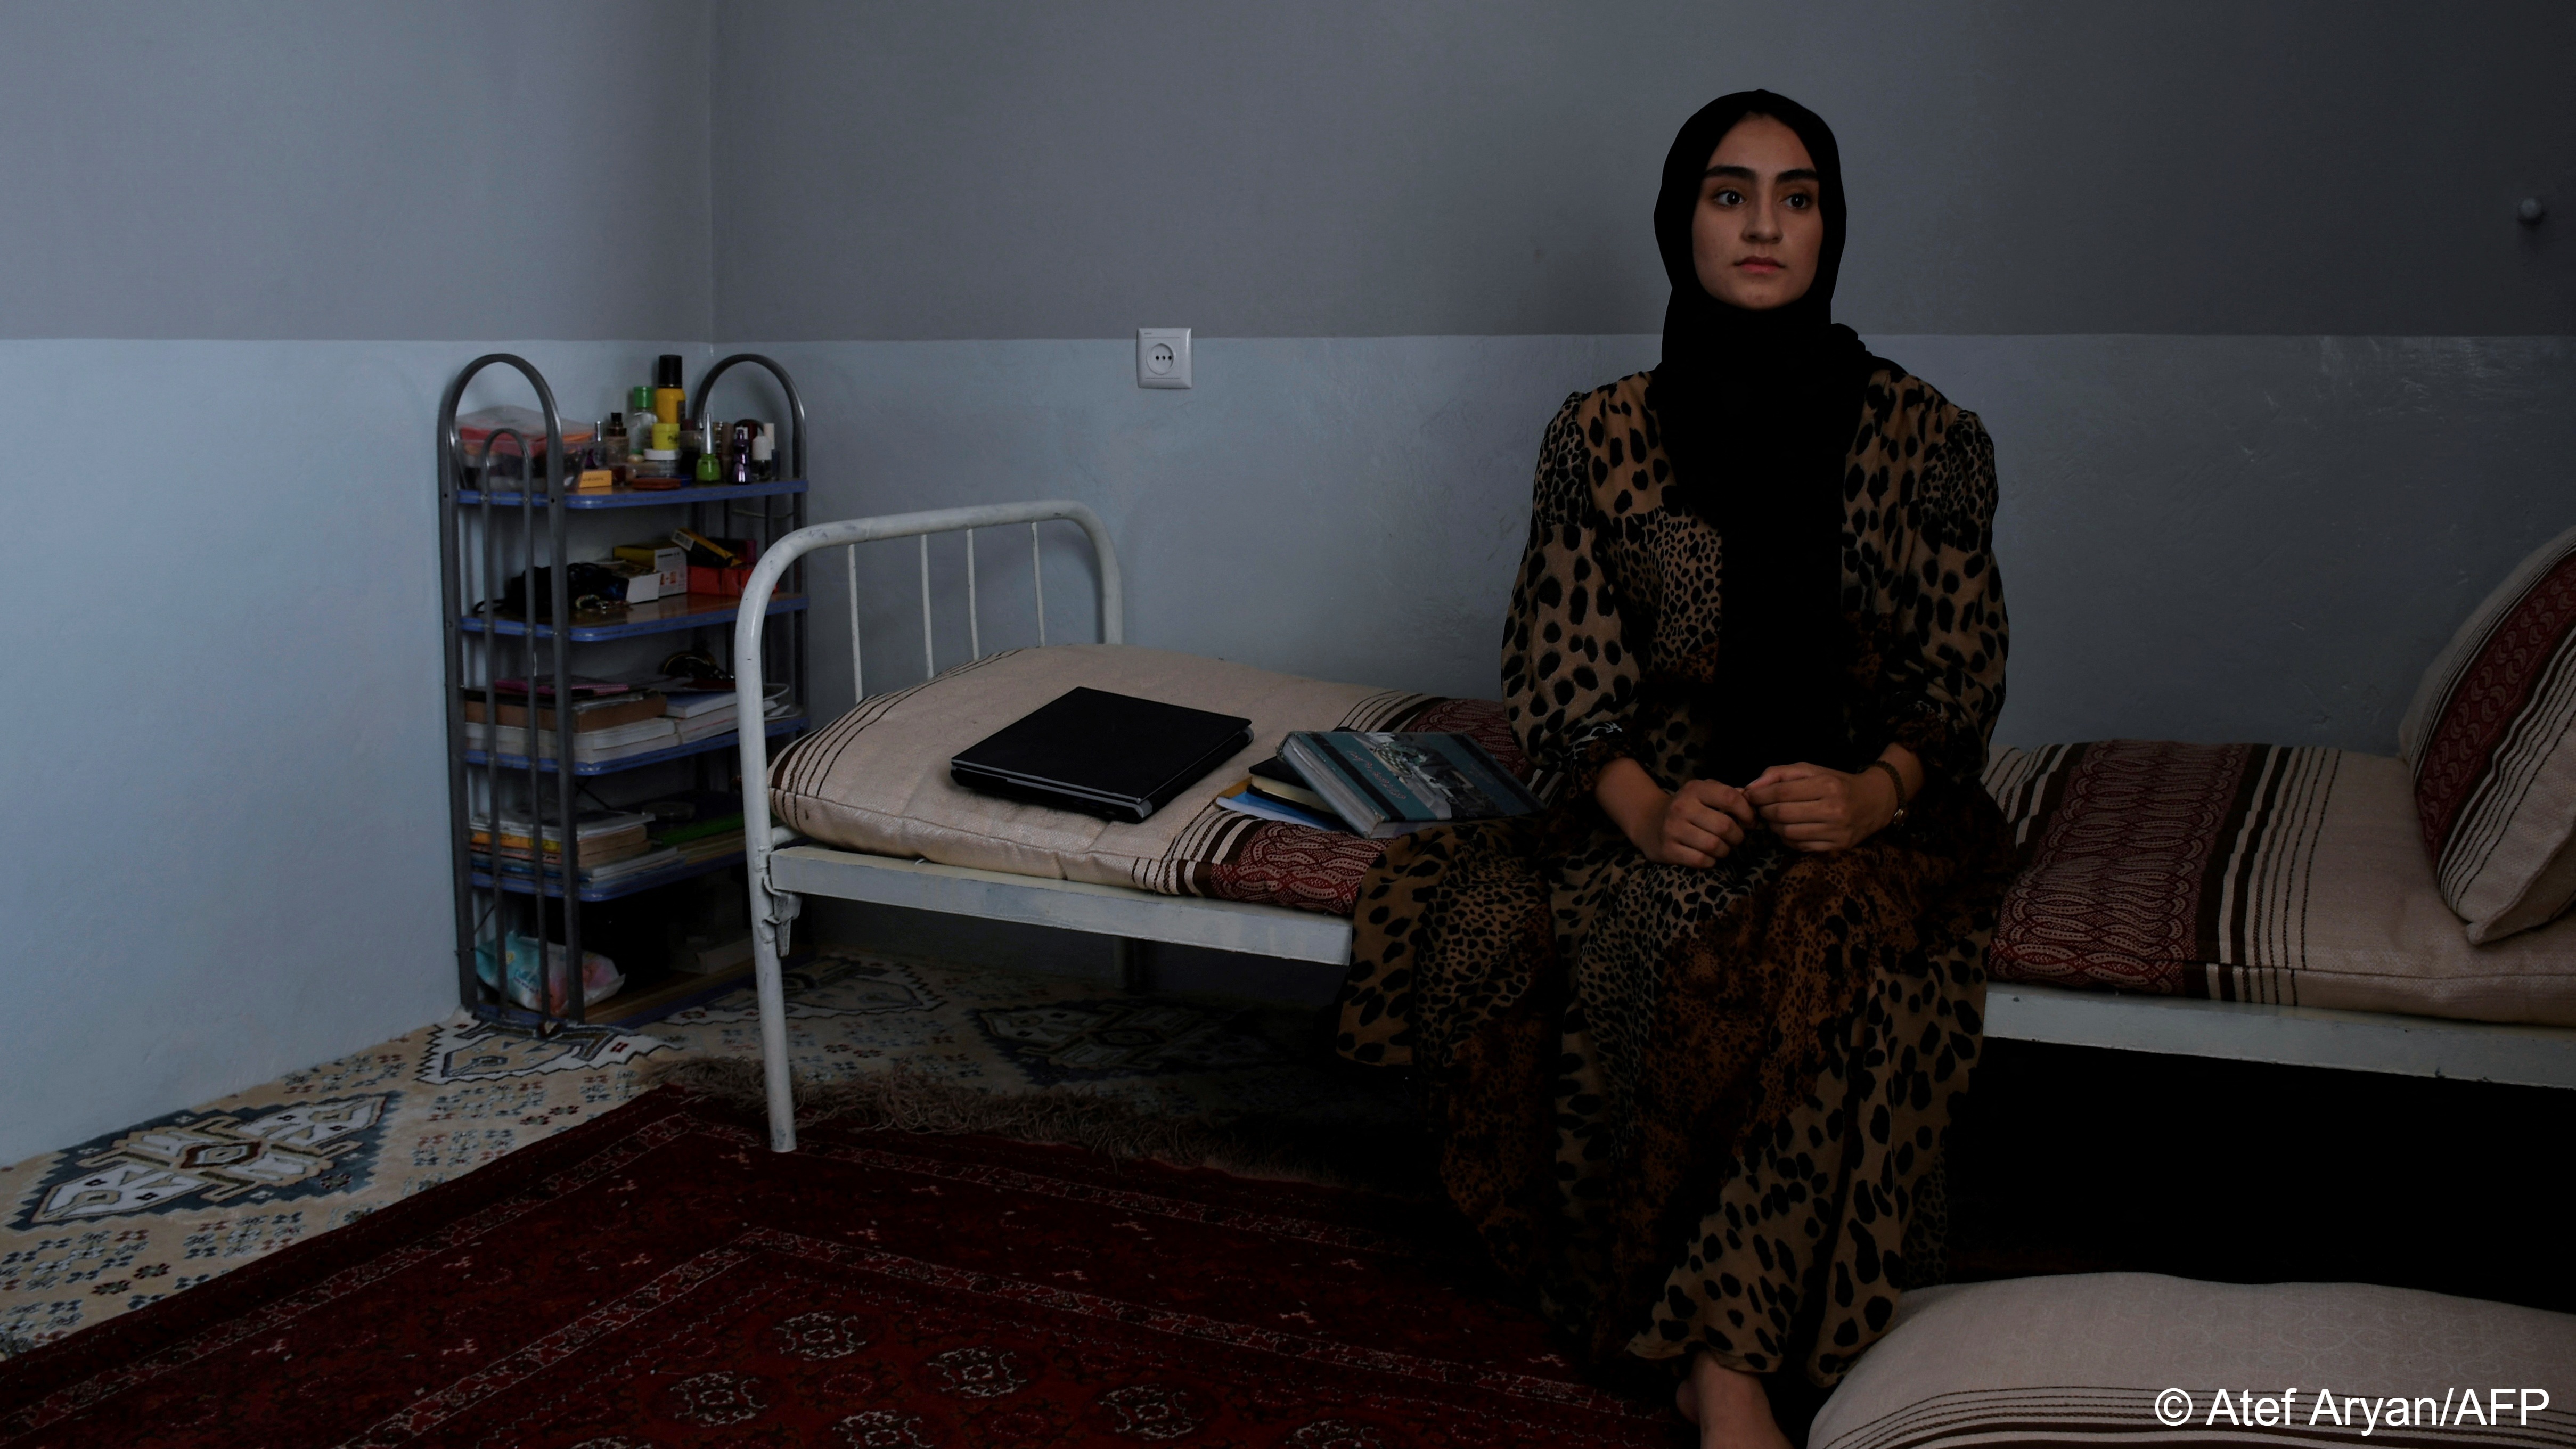 Hamasah Bawar, a medical student poses for a photograph at her house in Mazar-i-Sharif on 6 August 2023 (image: Atef ARYAN/AFP)